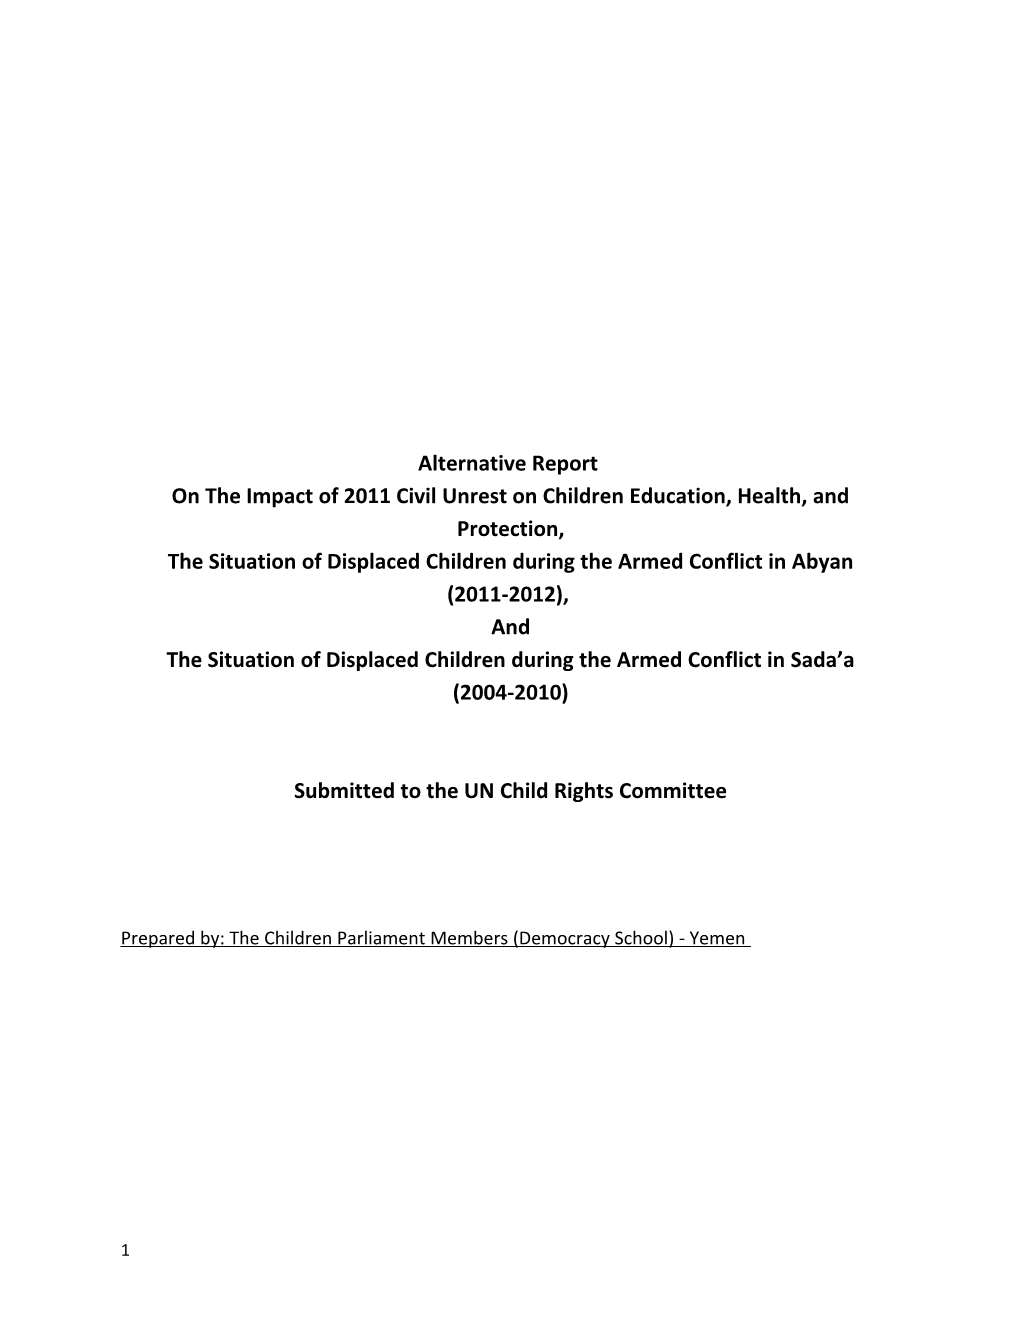 On the Impact of 2011 Civil Unrest on Children Education, Health, and Protection